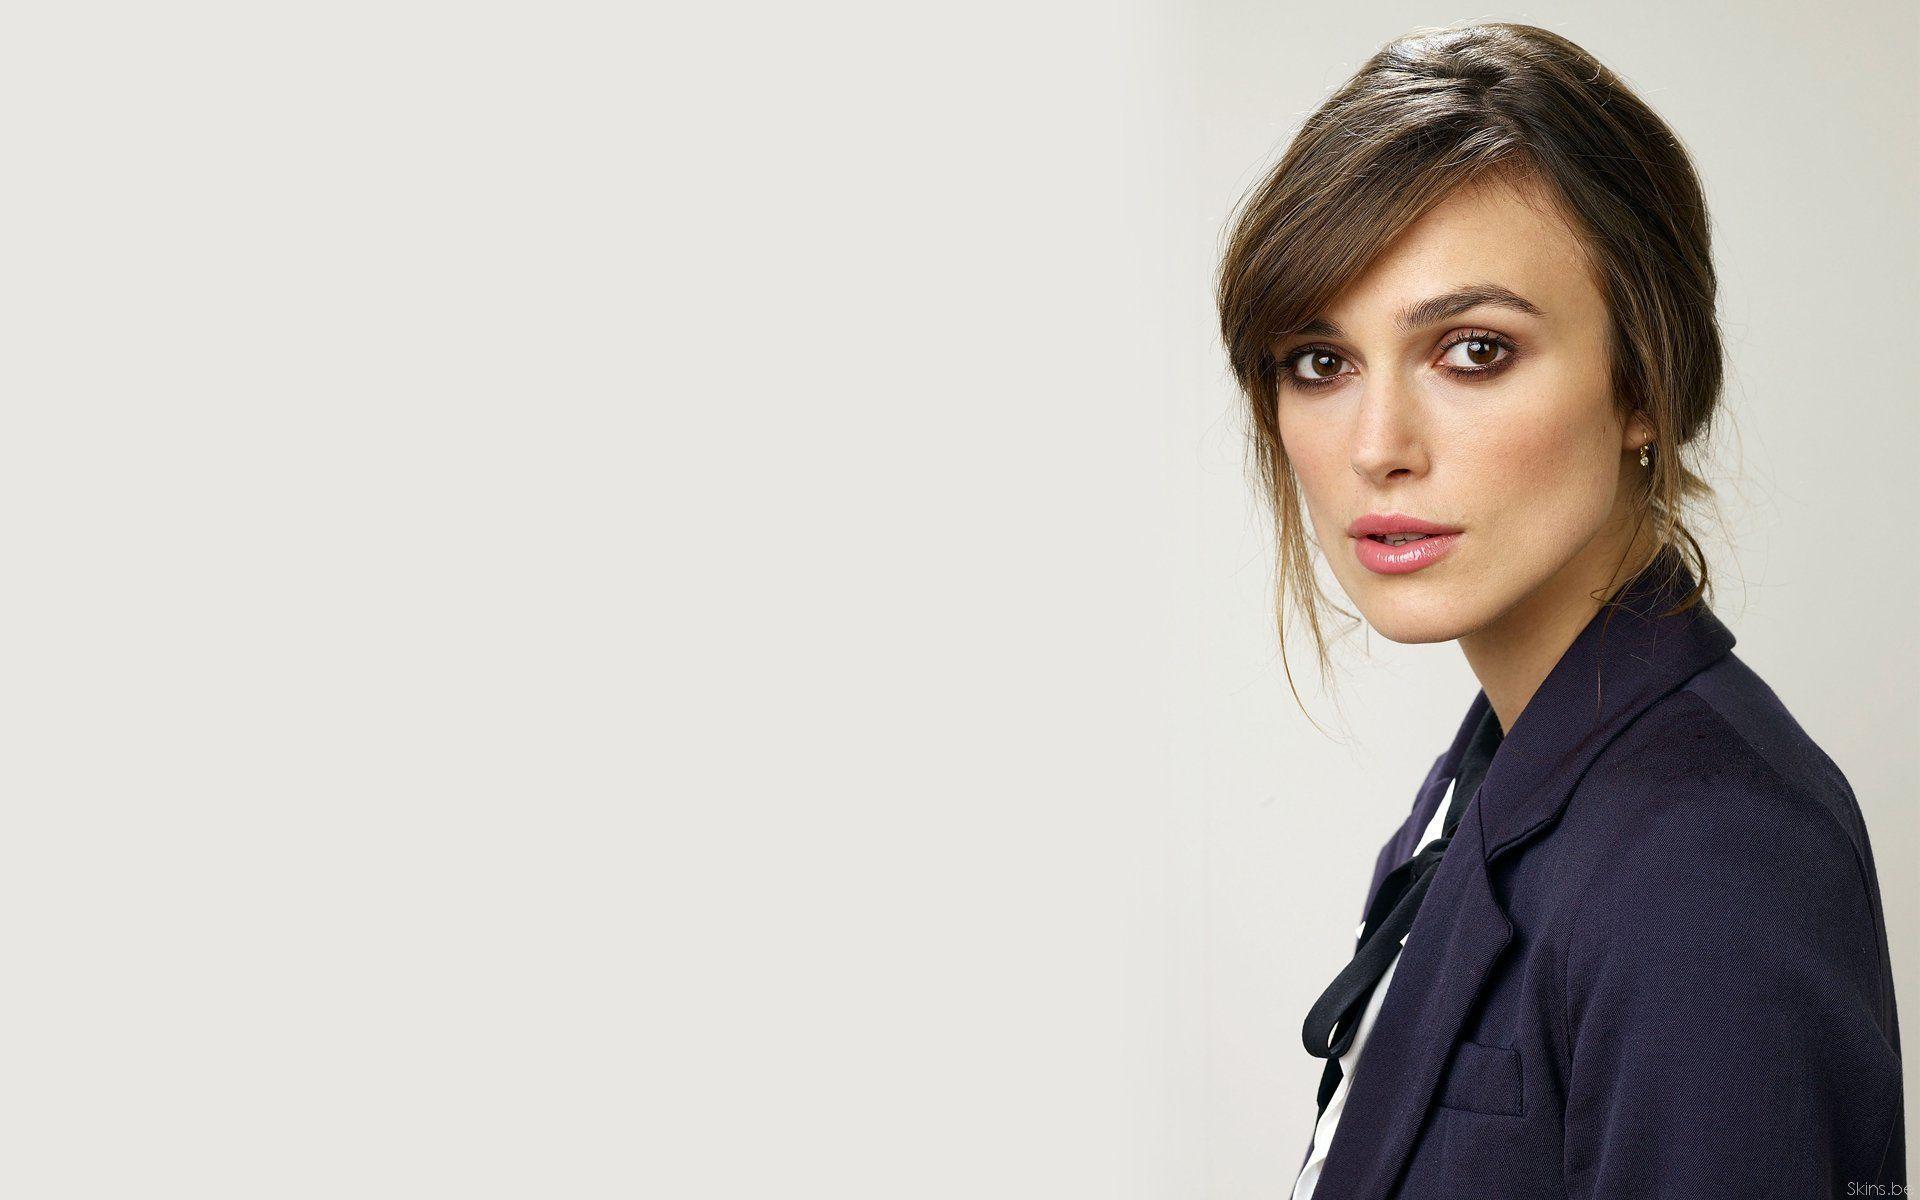 Keira Knightley Wallpaper Image Photo Picture Background